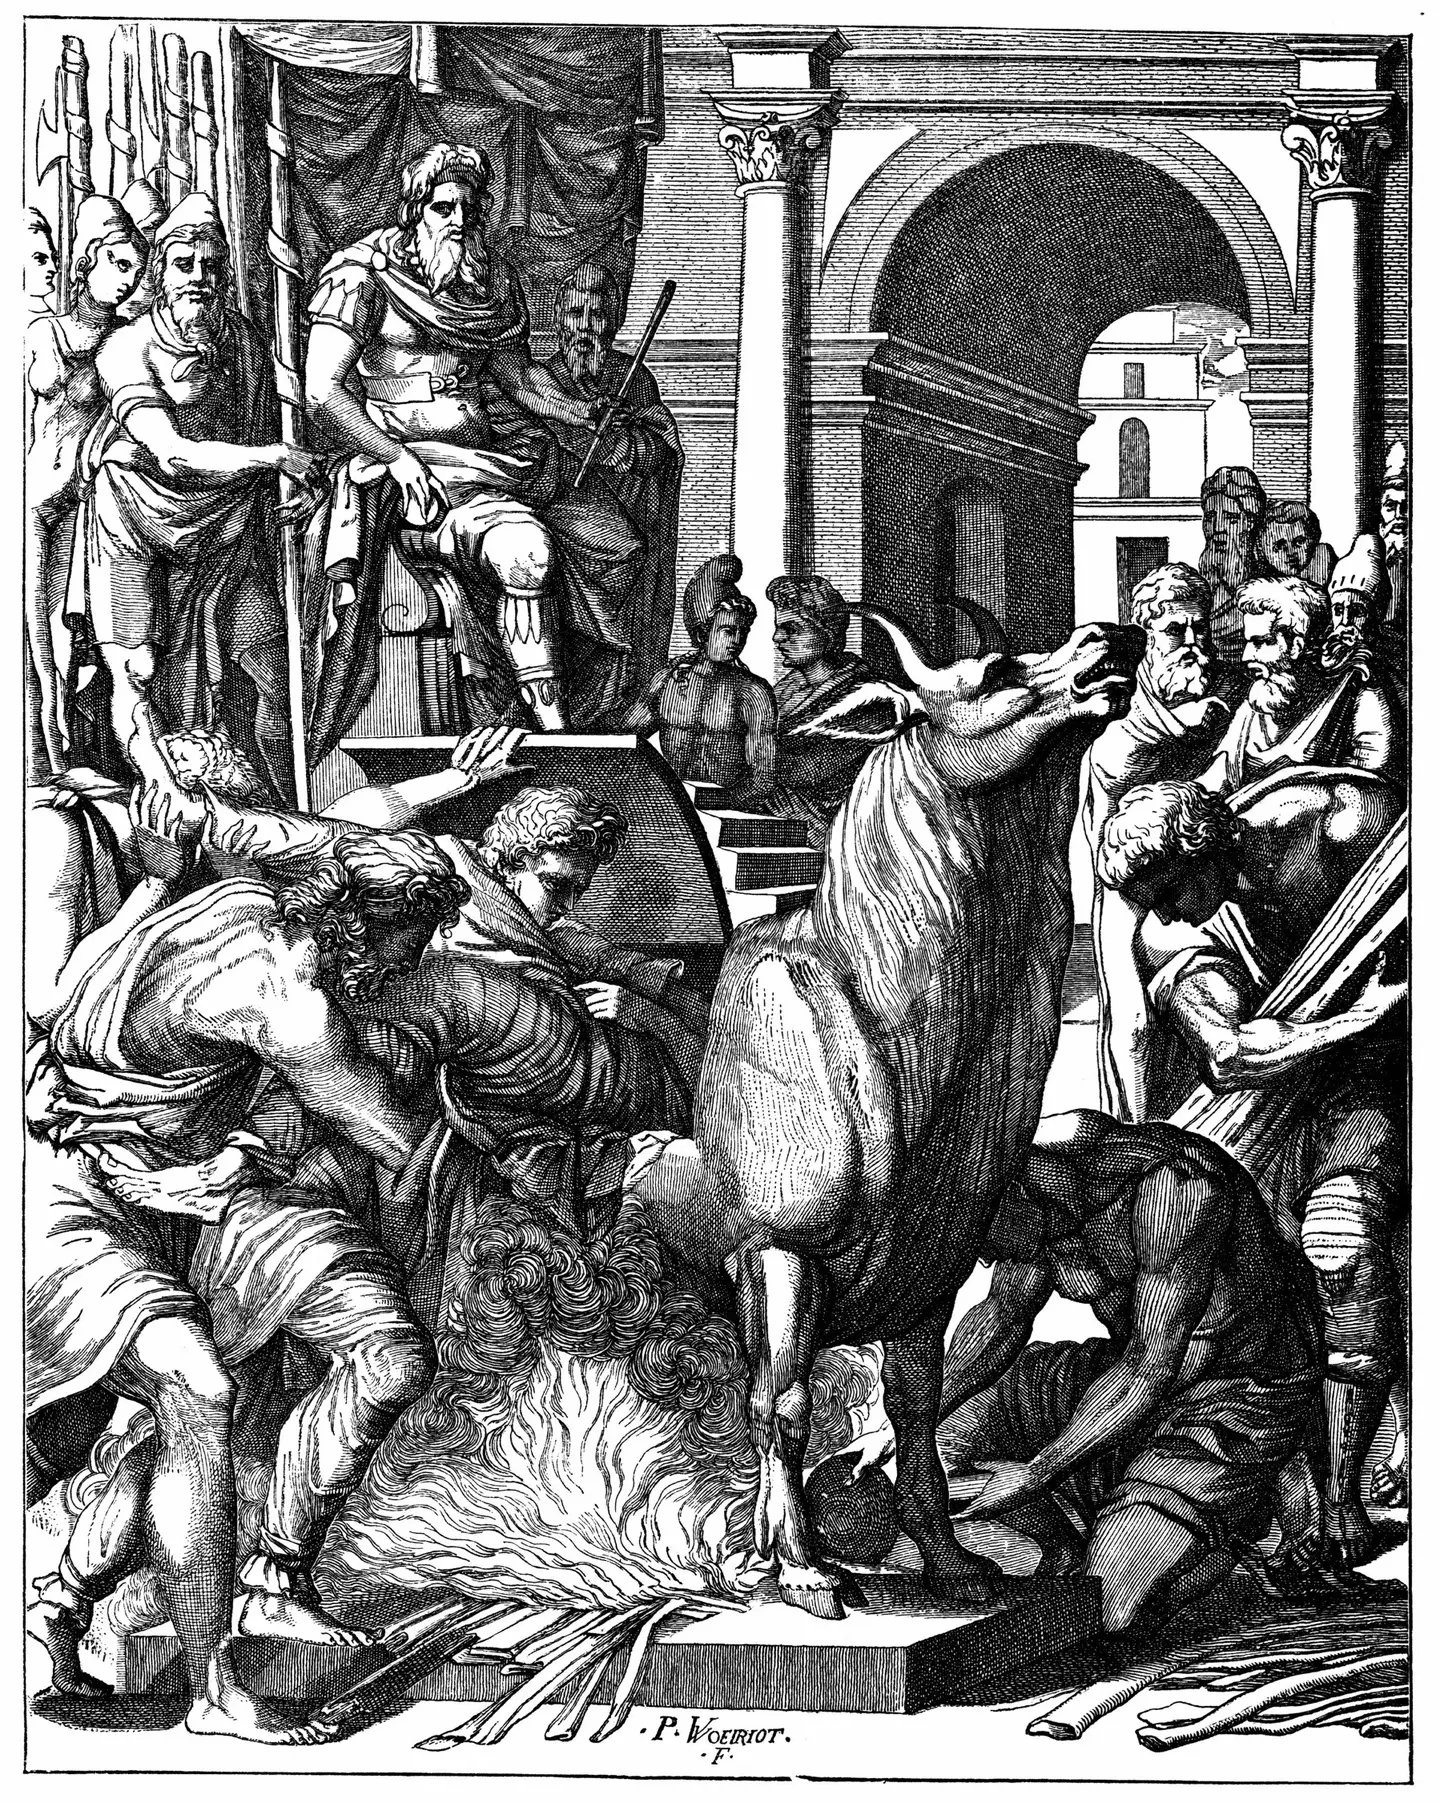 An artist's impression of Phalaris testing the Brazen Bull on Perilaus, the inventor of the torture device.